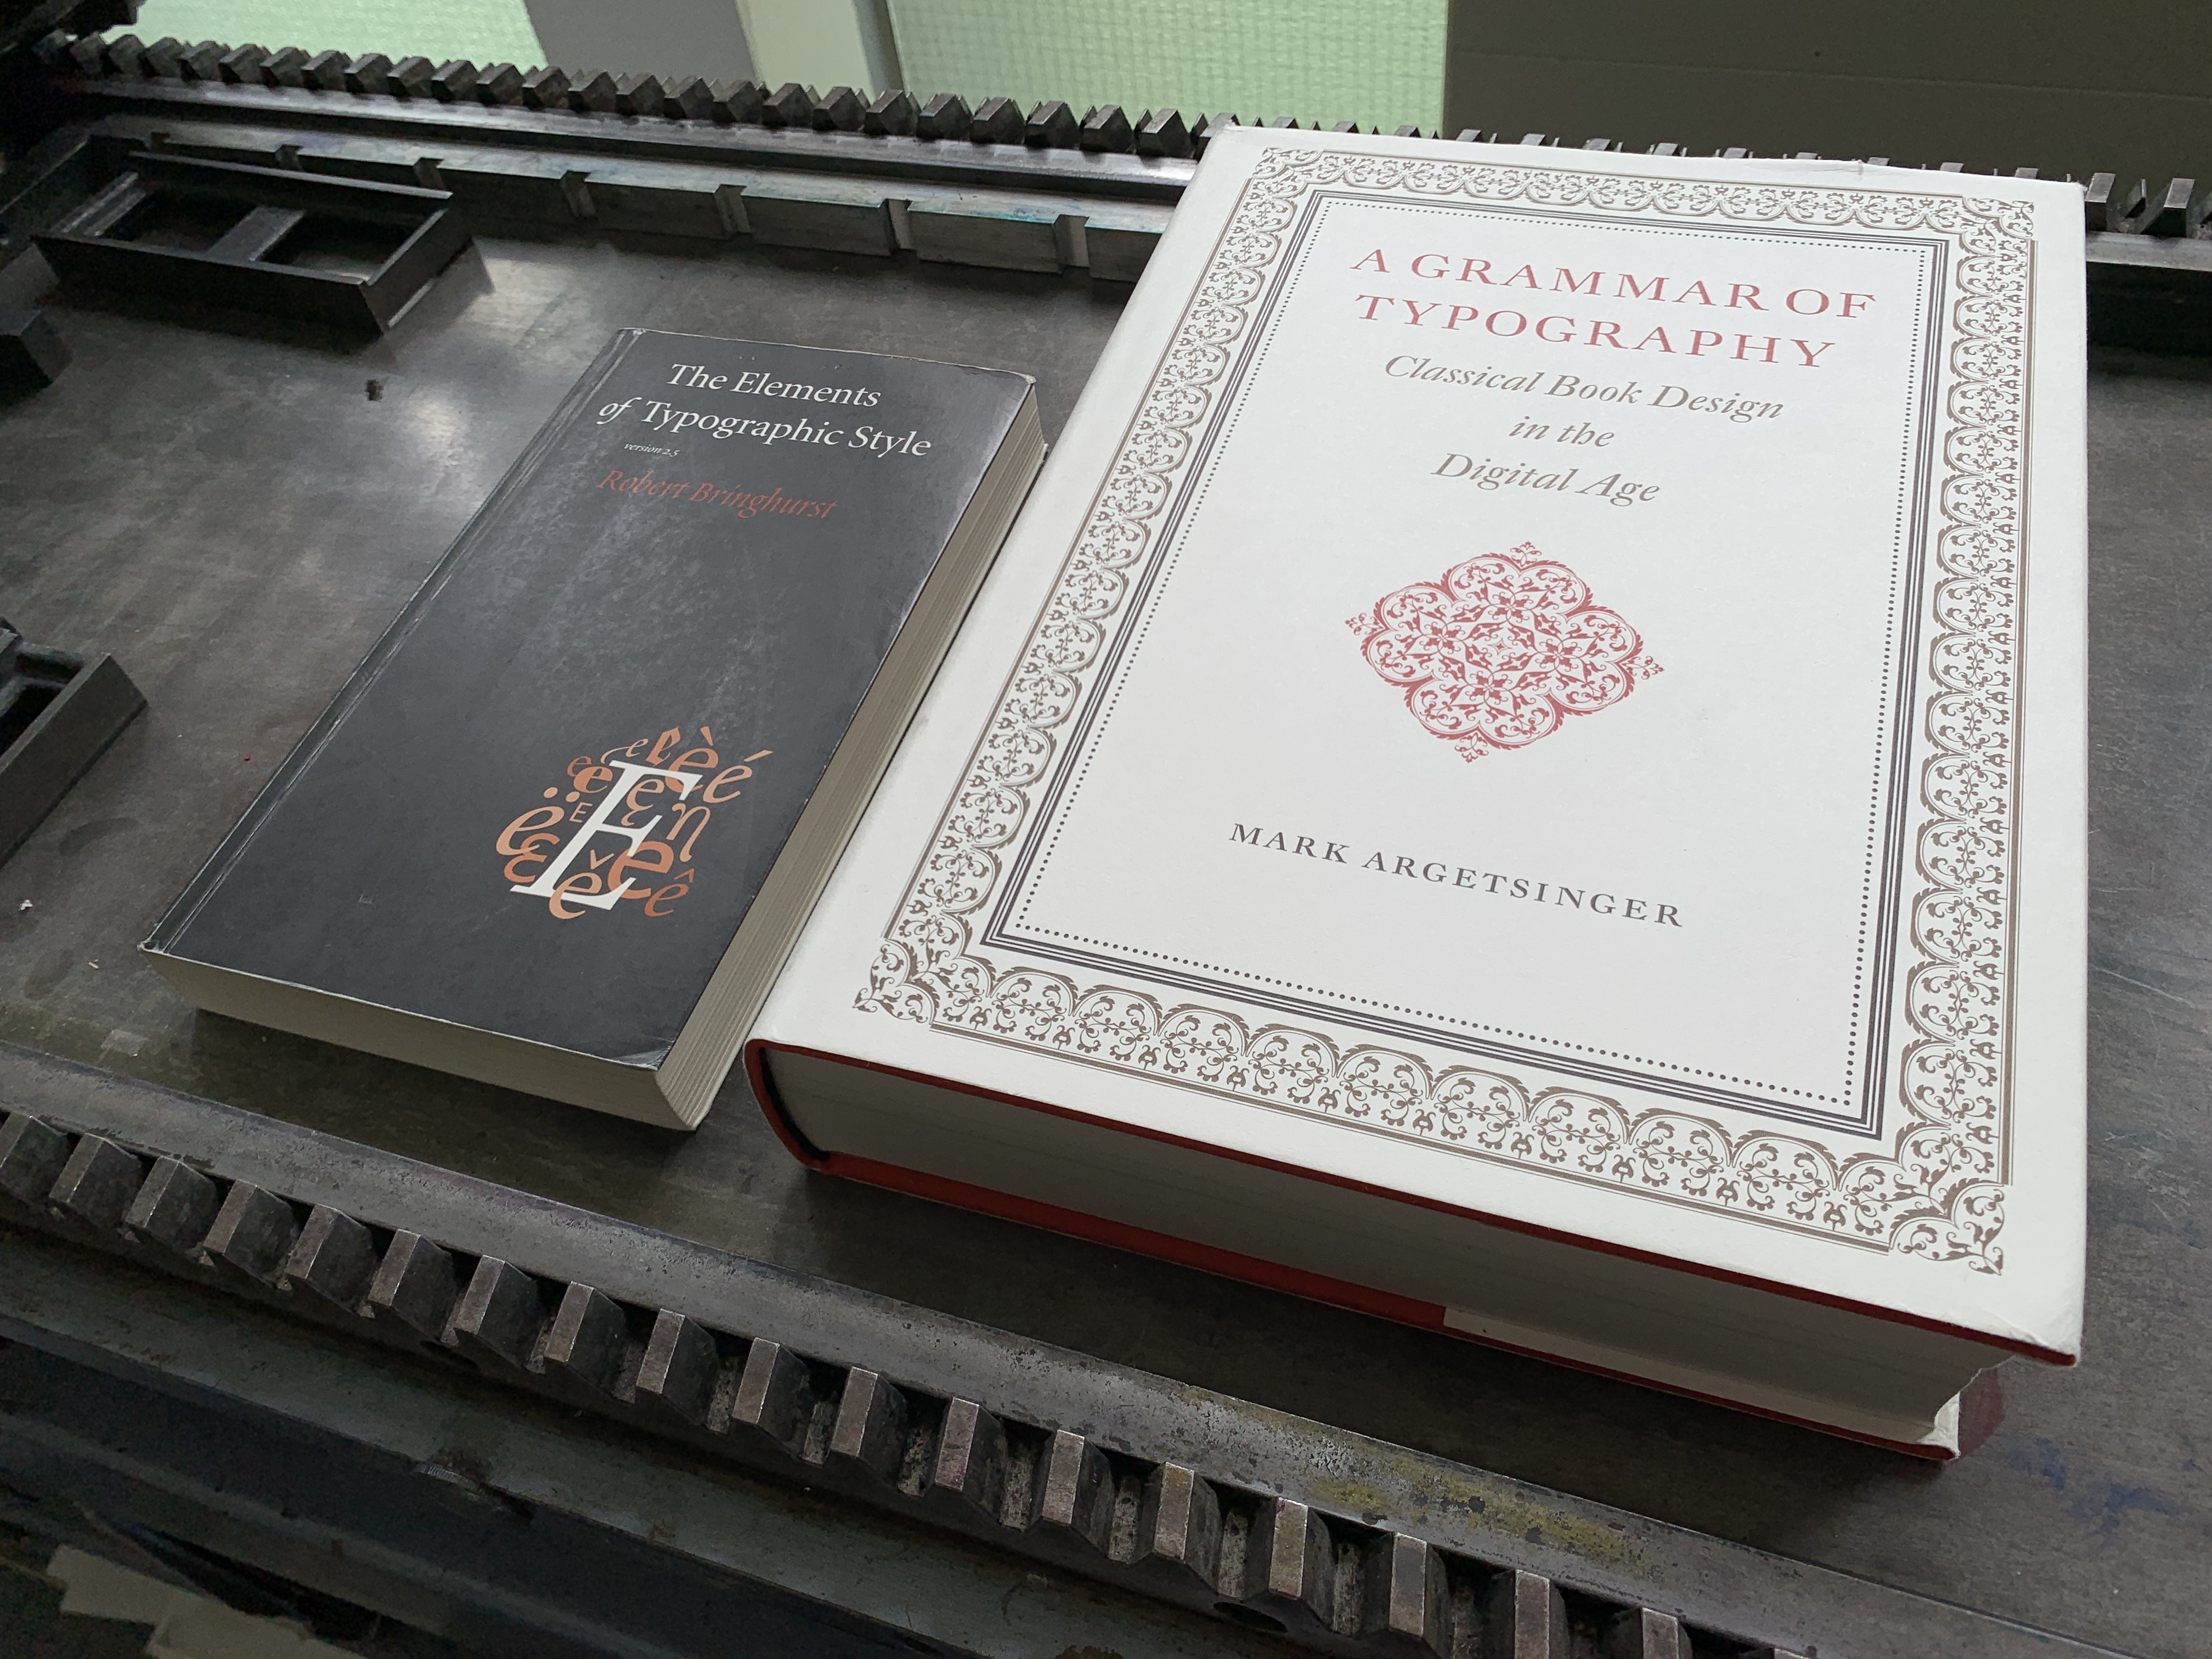 Photograph of Robert Bringhurst’s book The Elements of Typographic Style and Mark Argetsinger’s  Grammar of Typography: Classical Book Design in the Digital Age on a proofing press in Krefeld